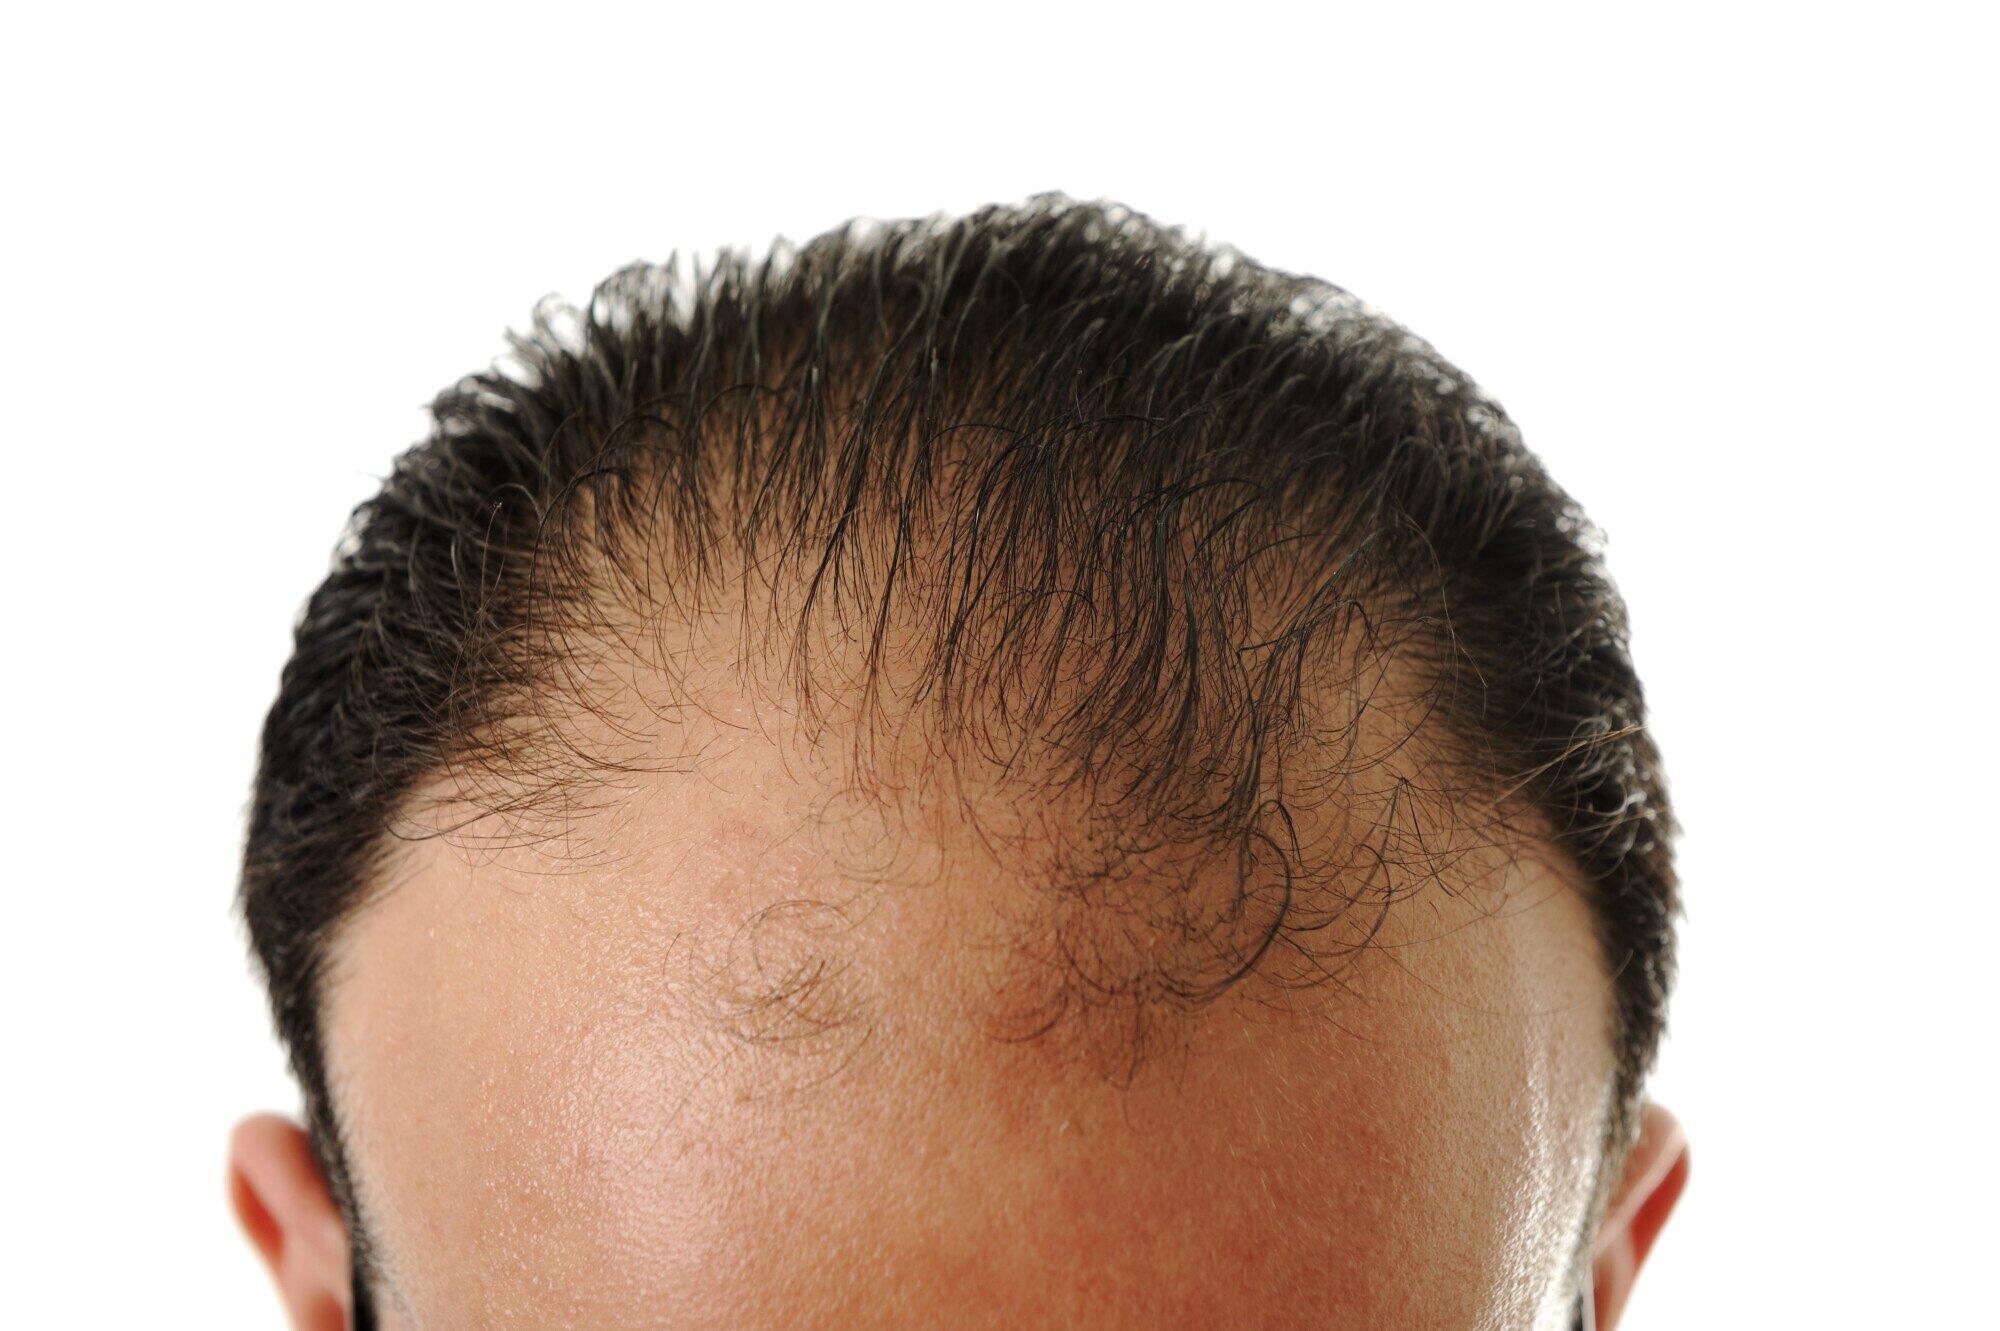 7 Things You Need to Know About PRF Hair Restoration